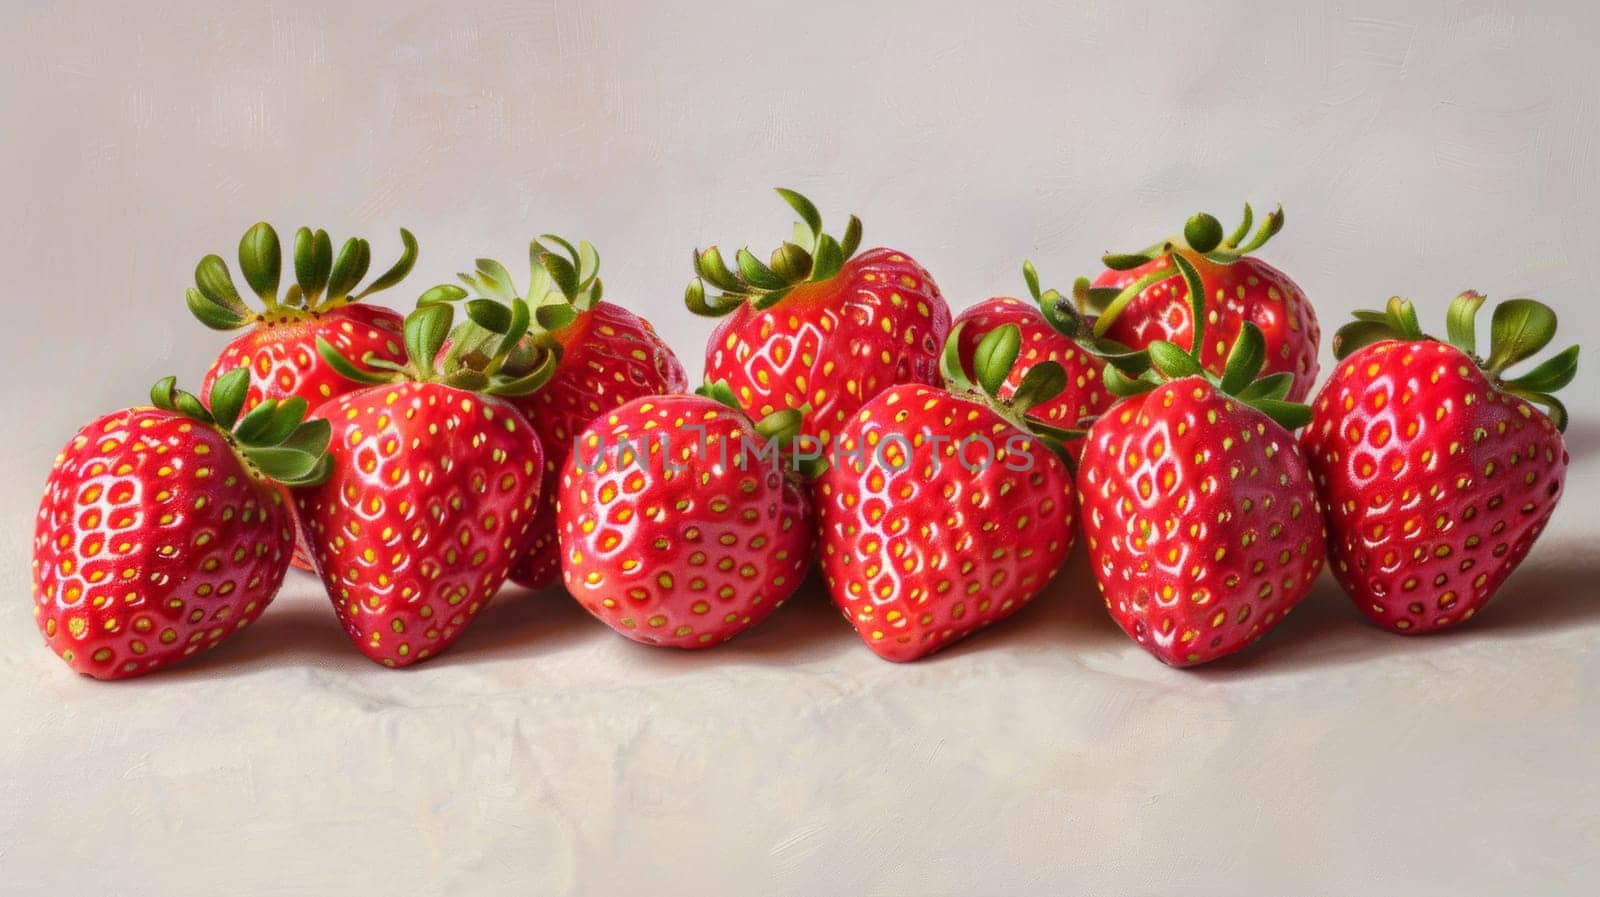 A group of strawberries are lined up on a white surface